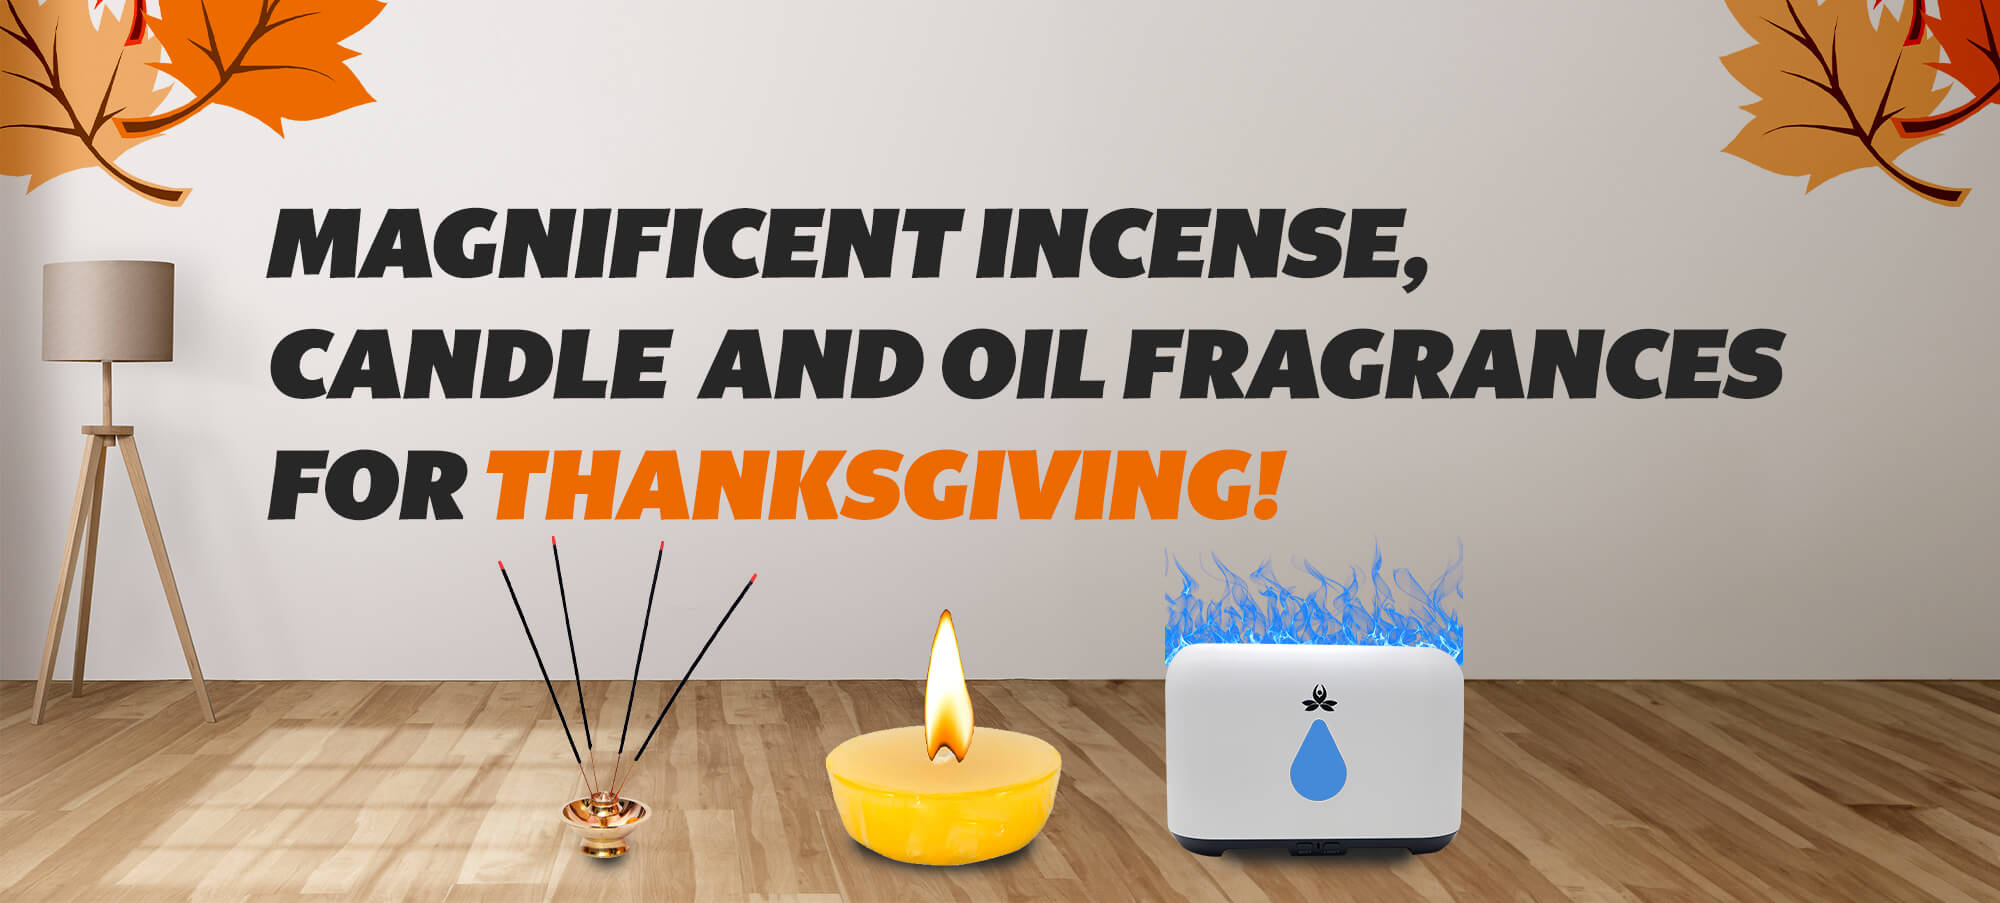 How To Make Your Home Smell Good For Thanksgiving?